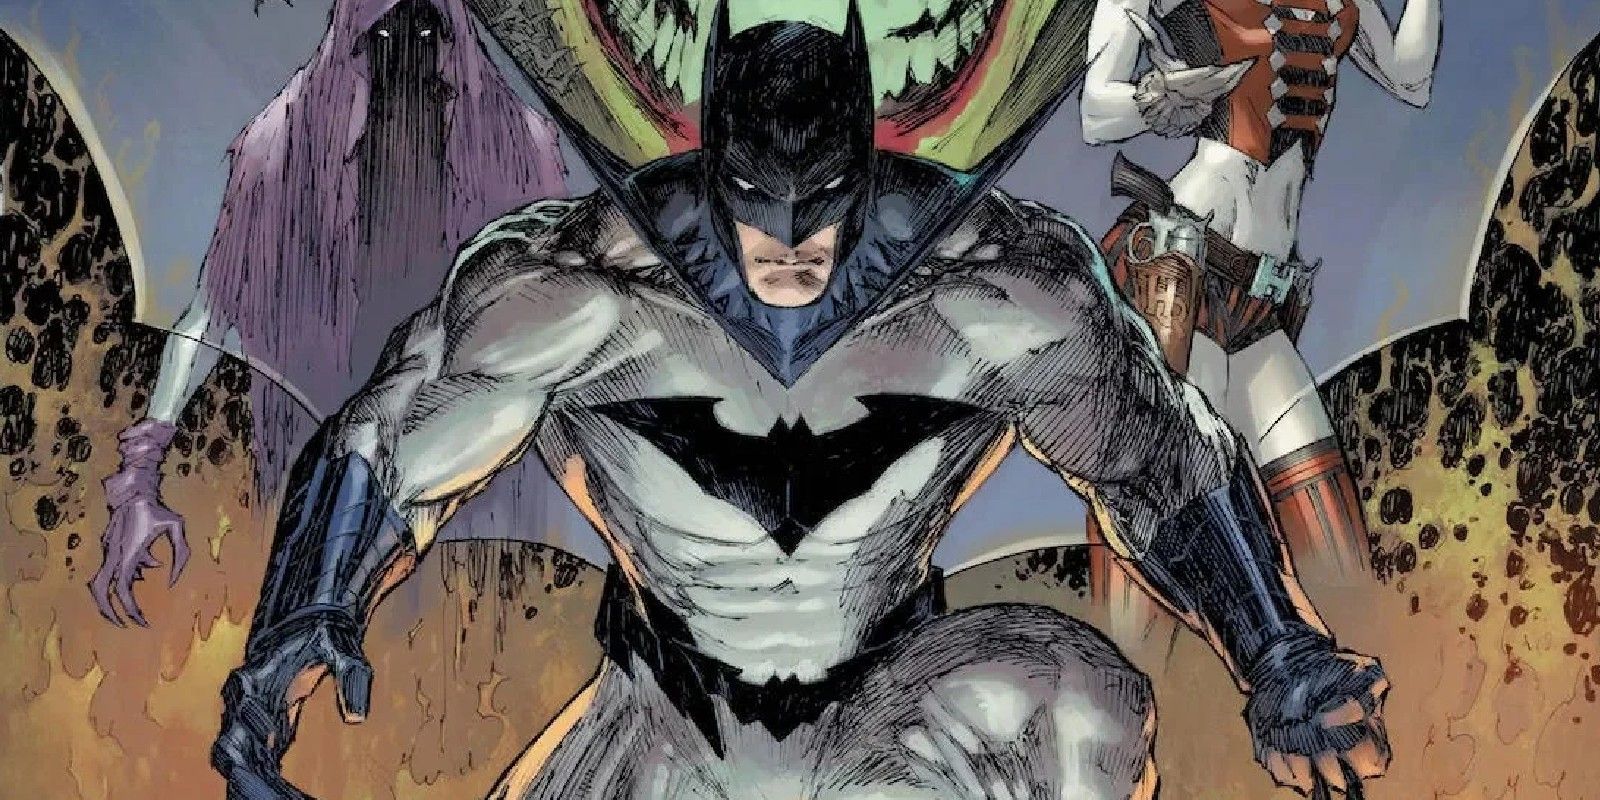 DC Artist Reveals Why Batman's Movie Armor Could Never Work in Comics